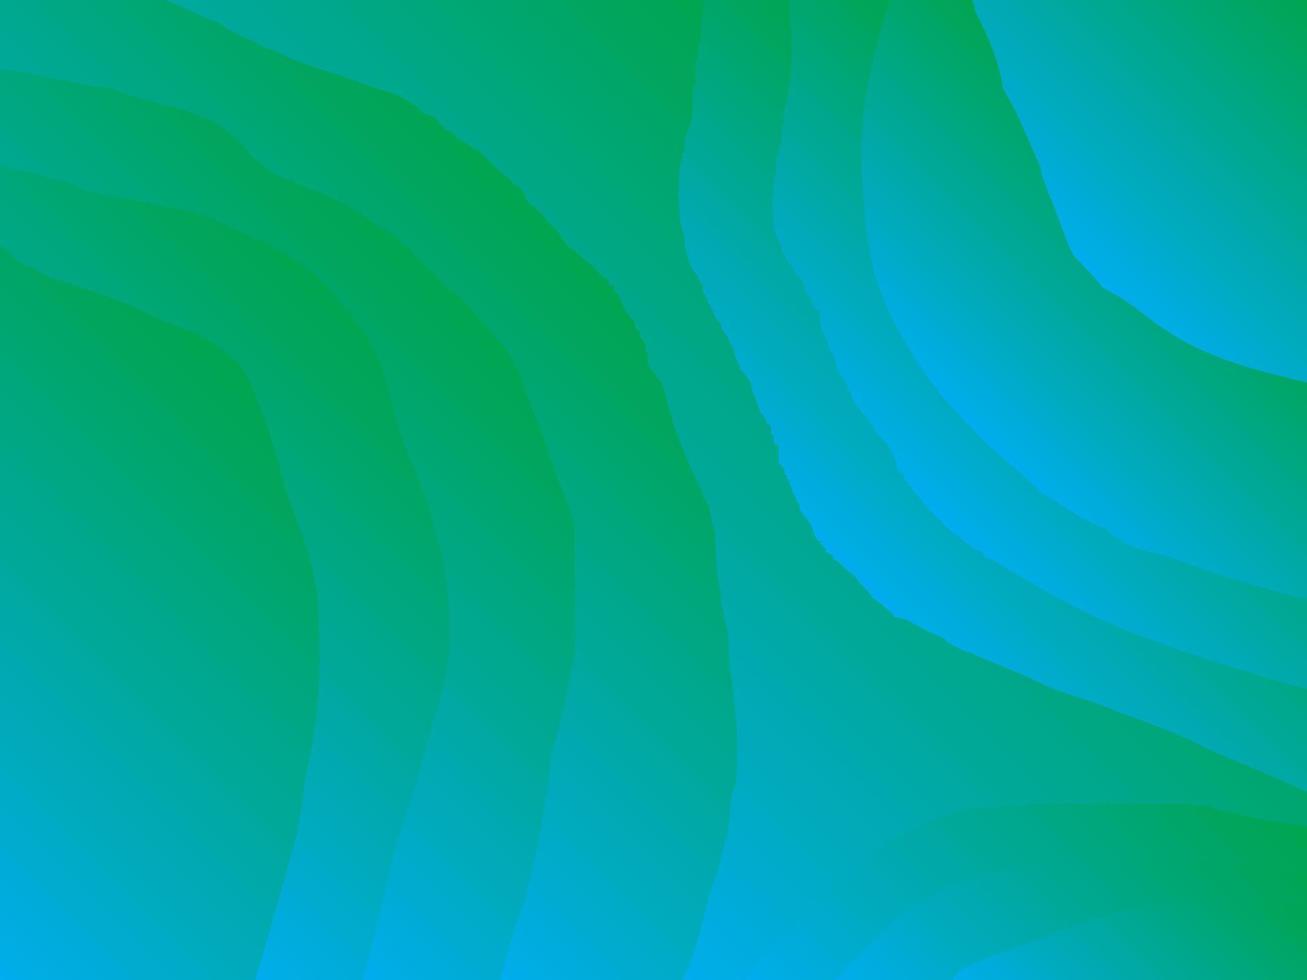 Blue and green abstract gradient vector background illustrations for wallpaper, print, decoration, and many more